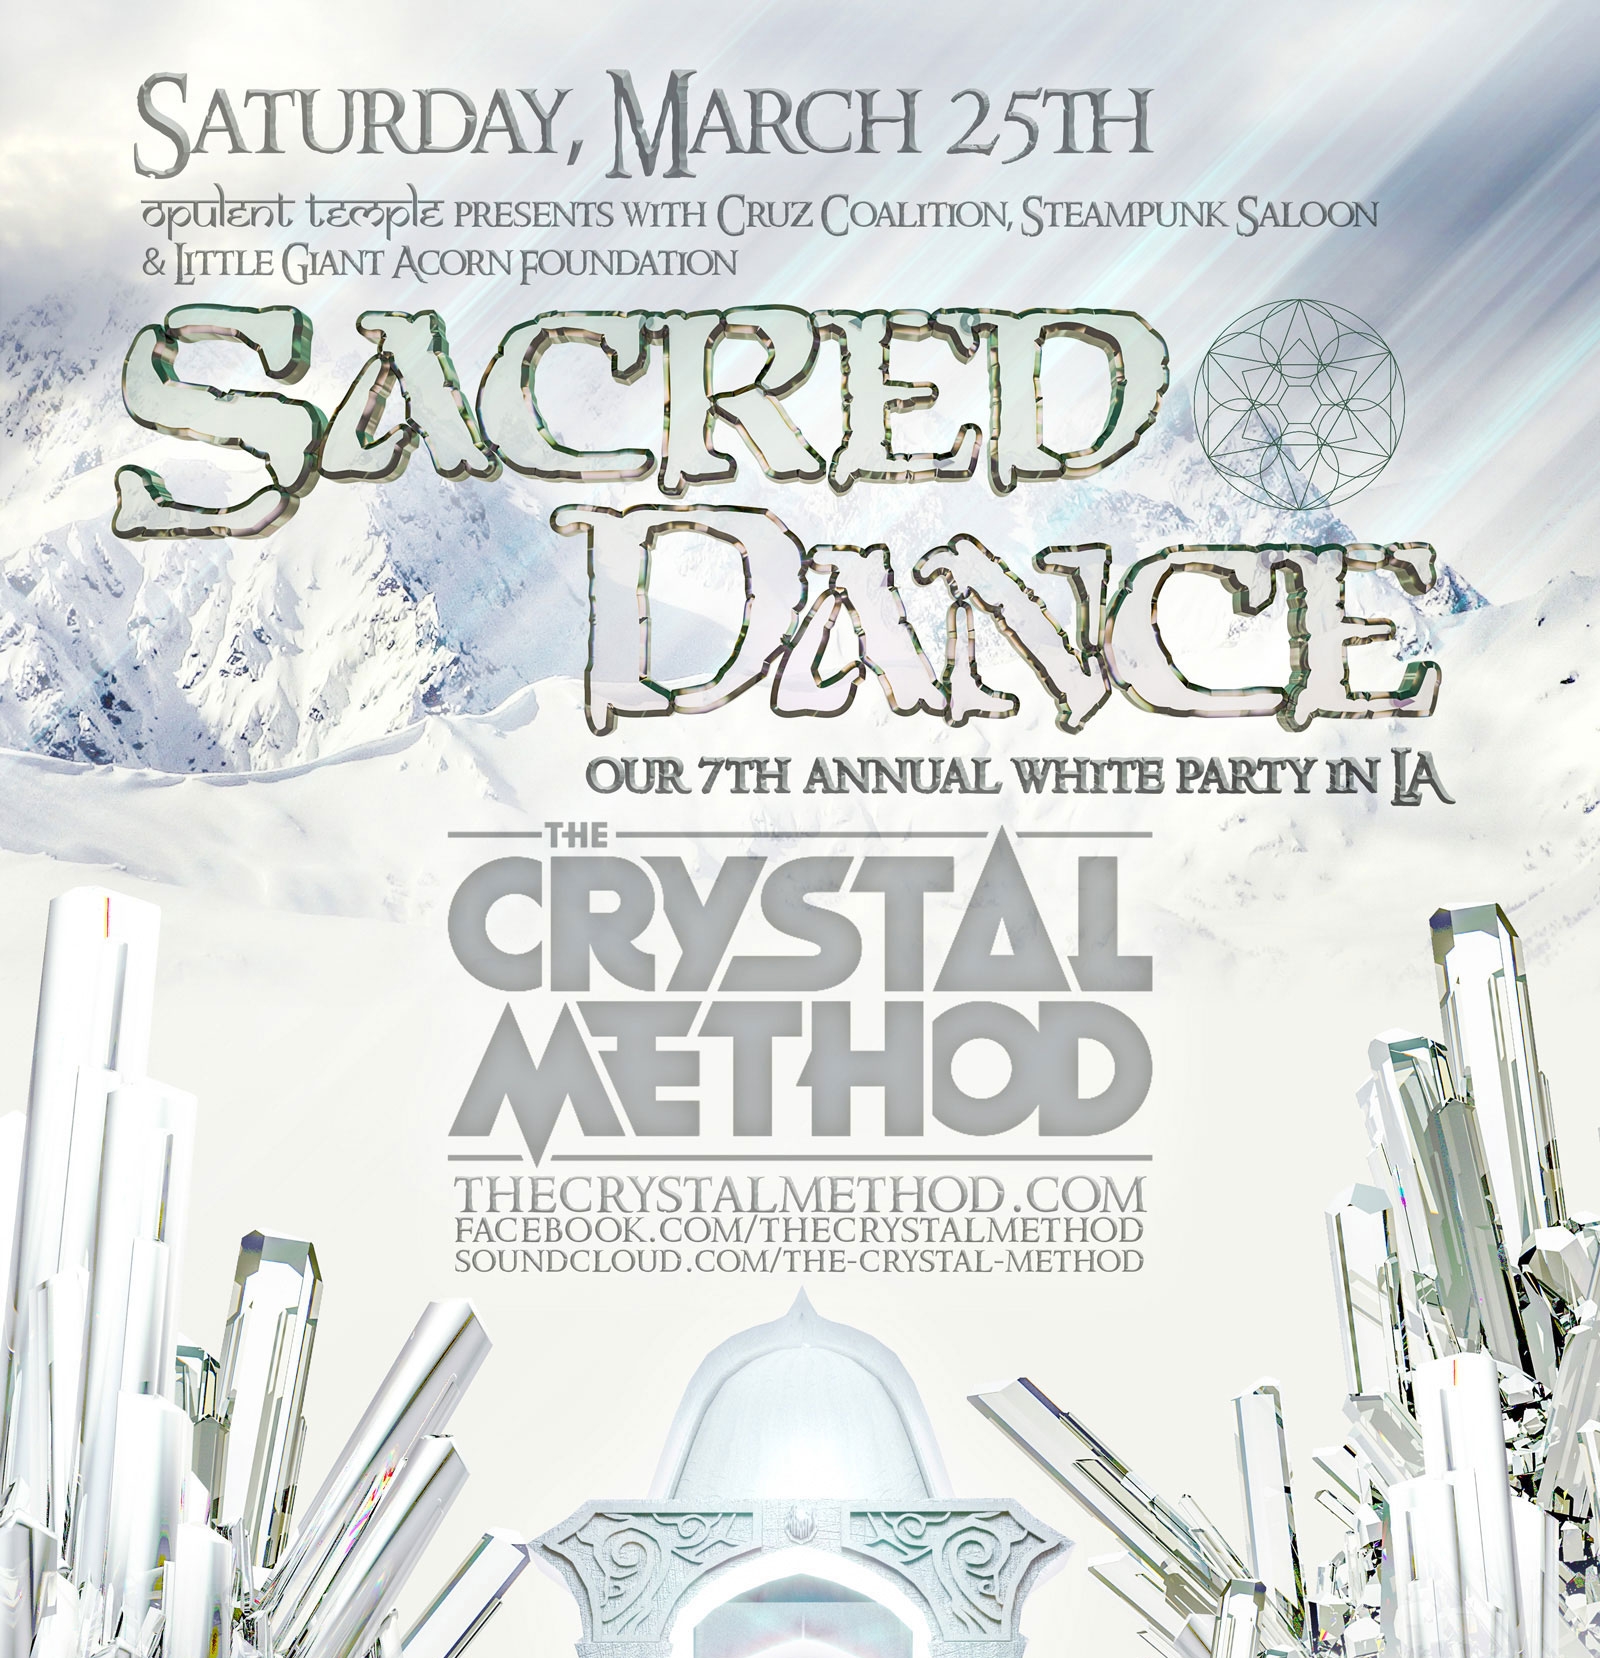 Opulent Temple’s Sacred Dance ‘White Party’ LA with Crystal Method 2017